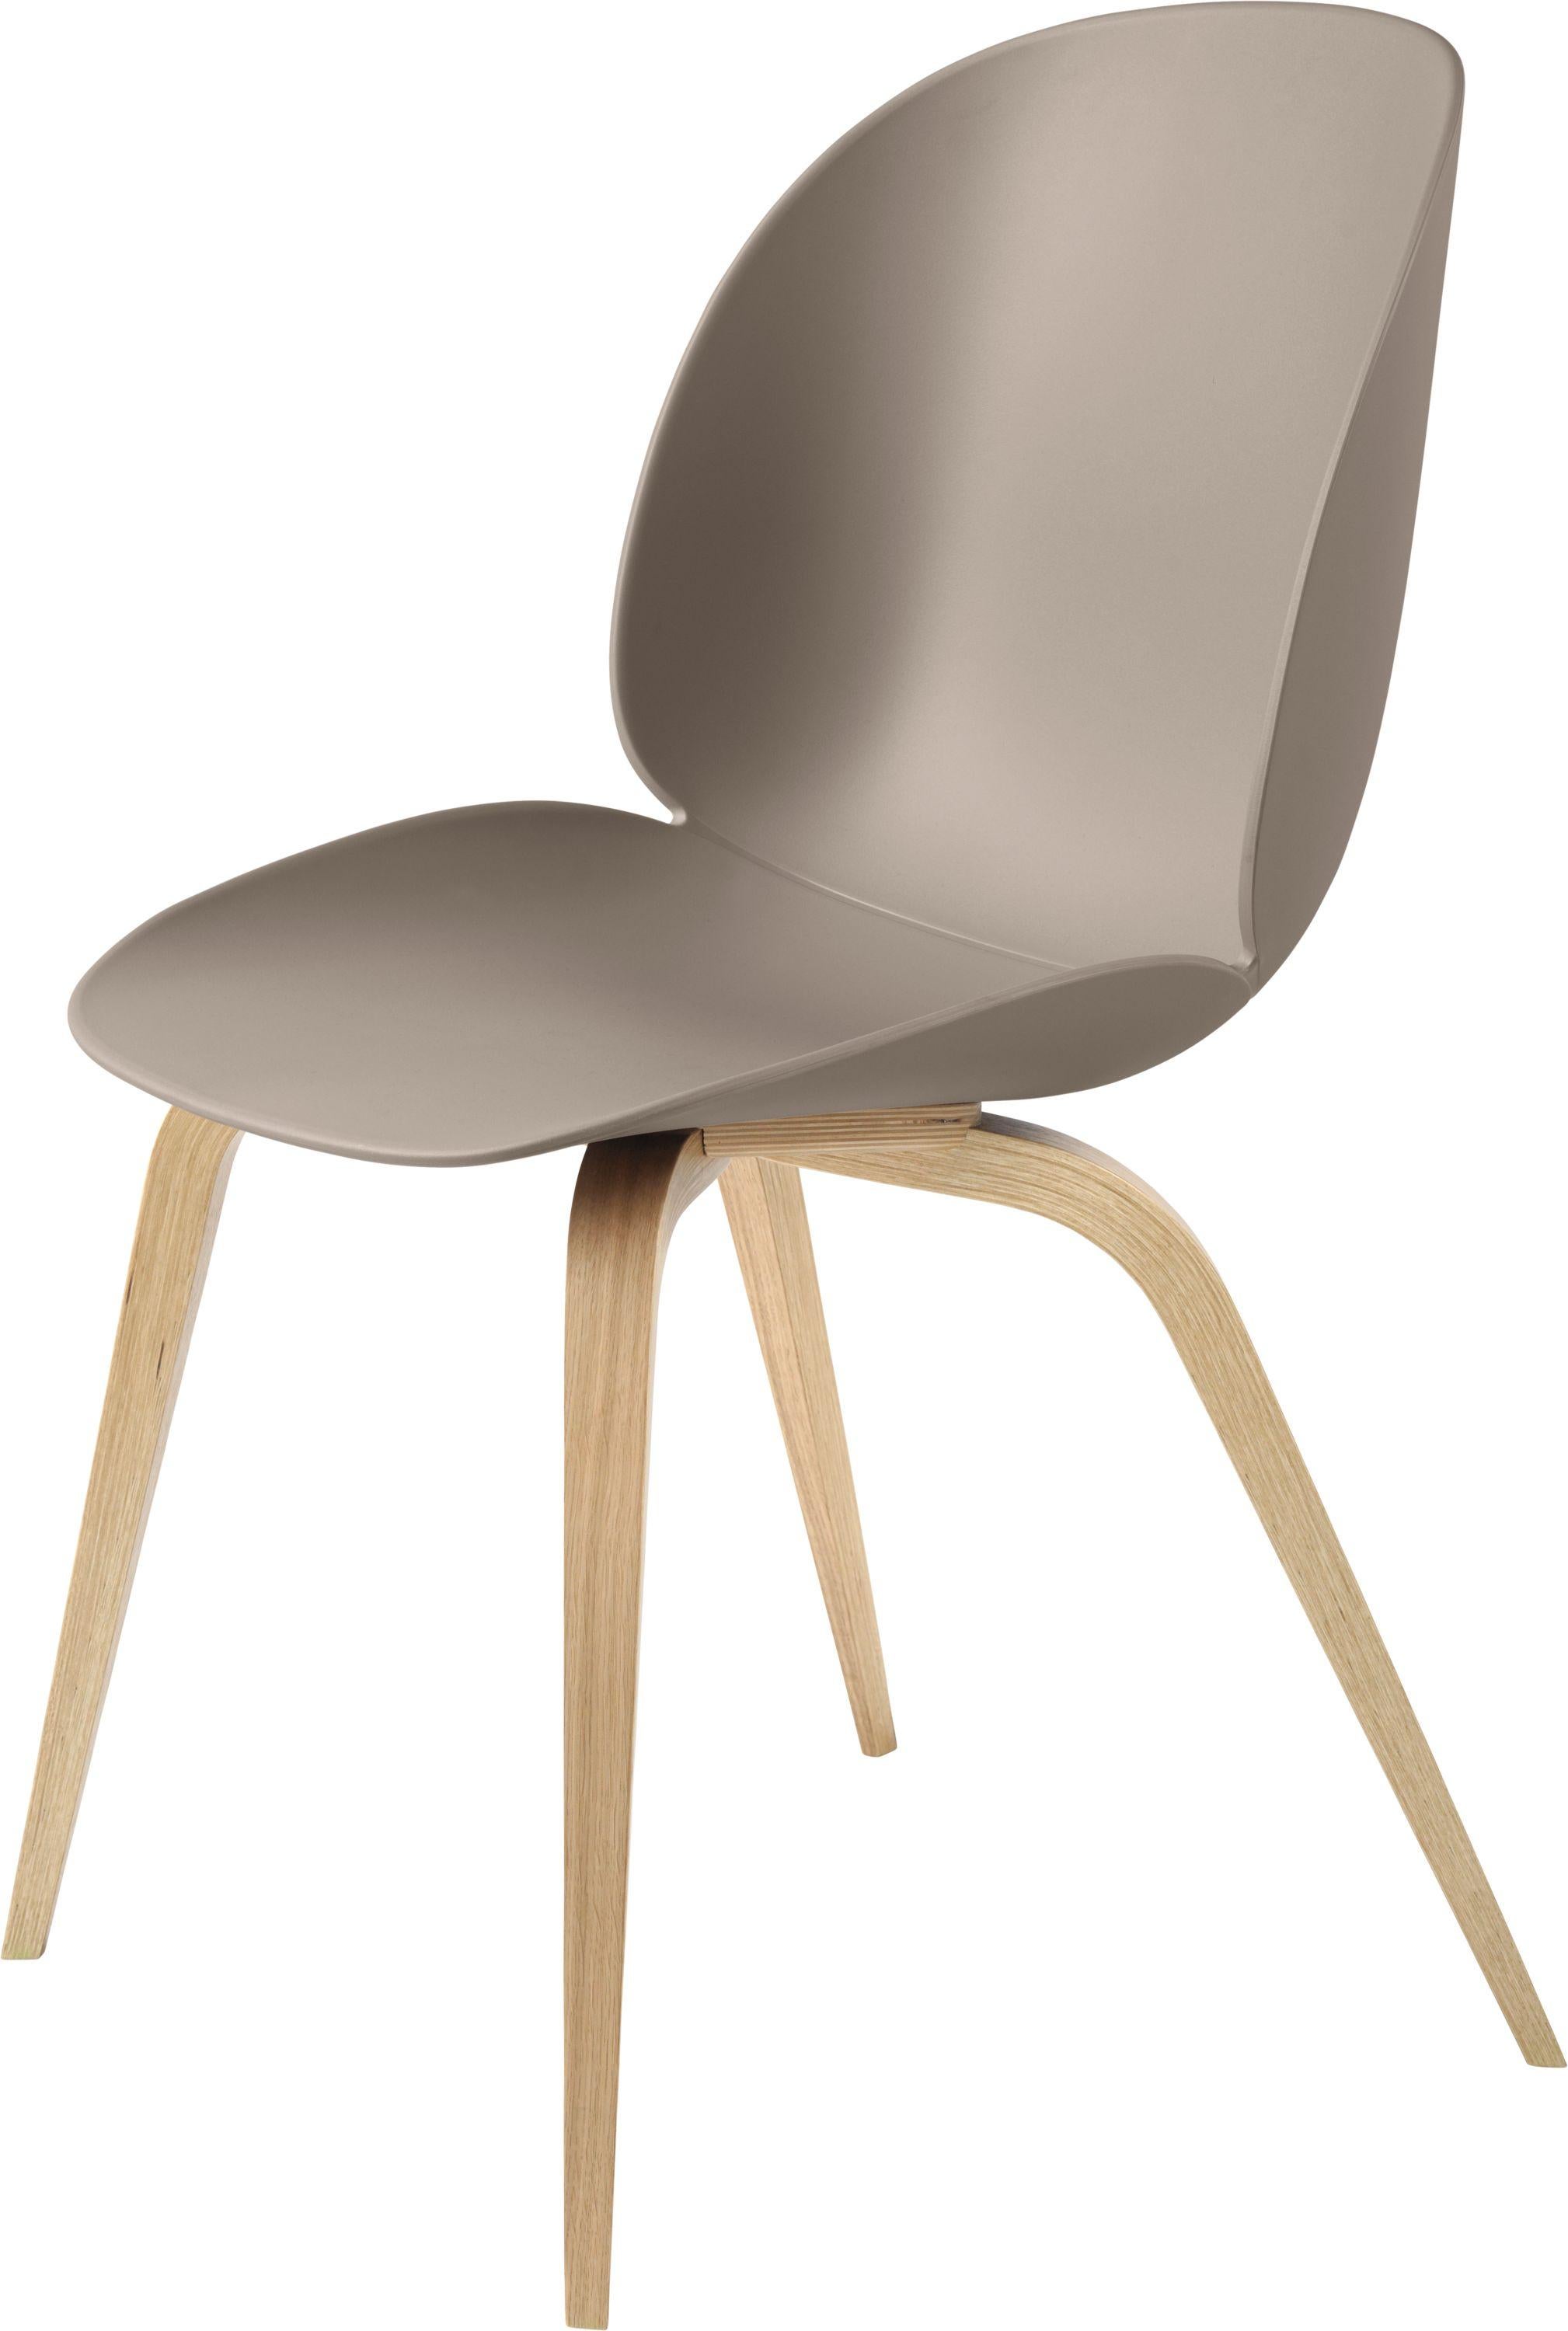 Lacquered GamFratesi 'Beetle' Dining Chair with Oak Conic Base